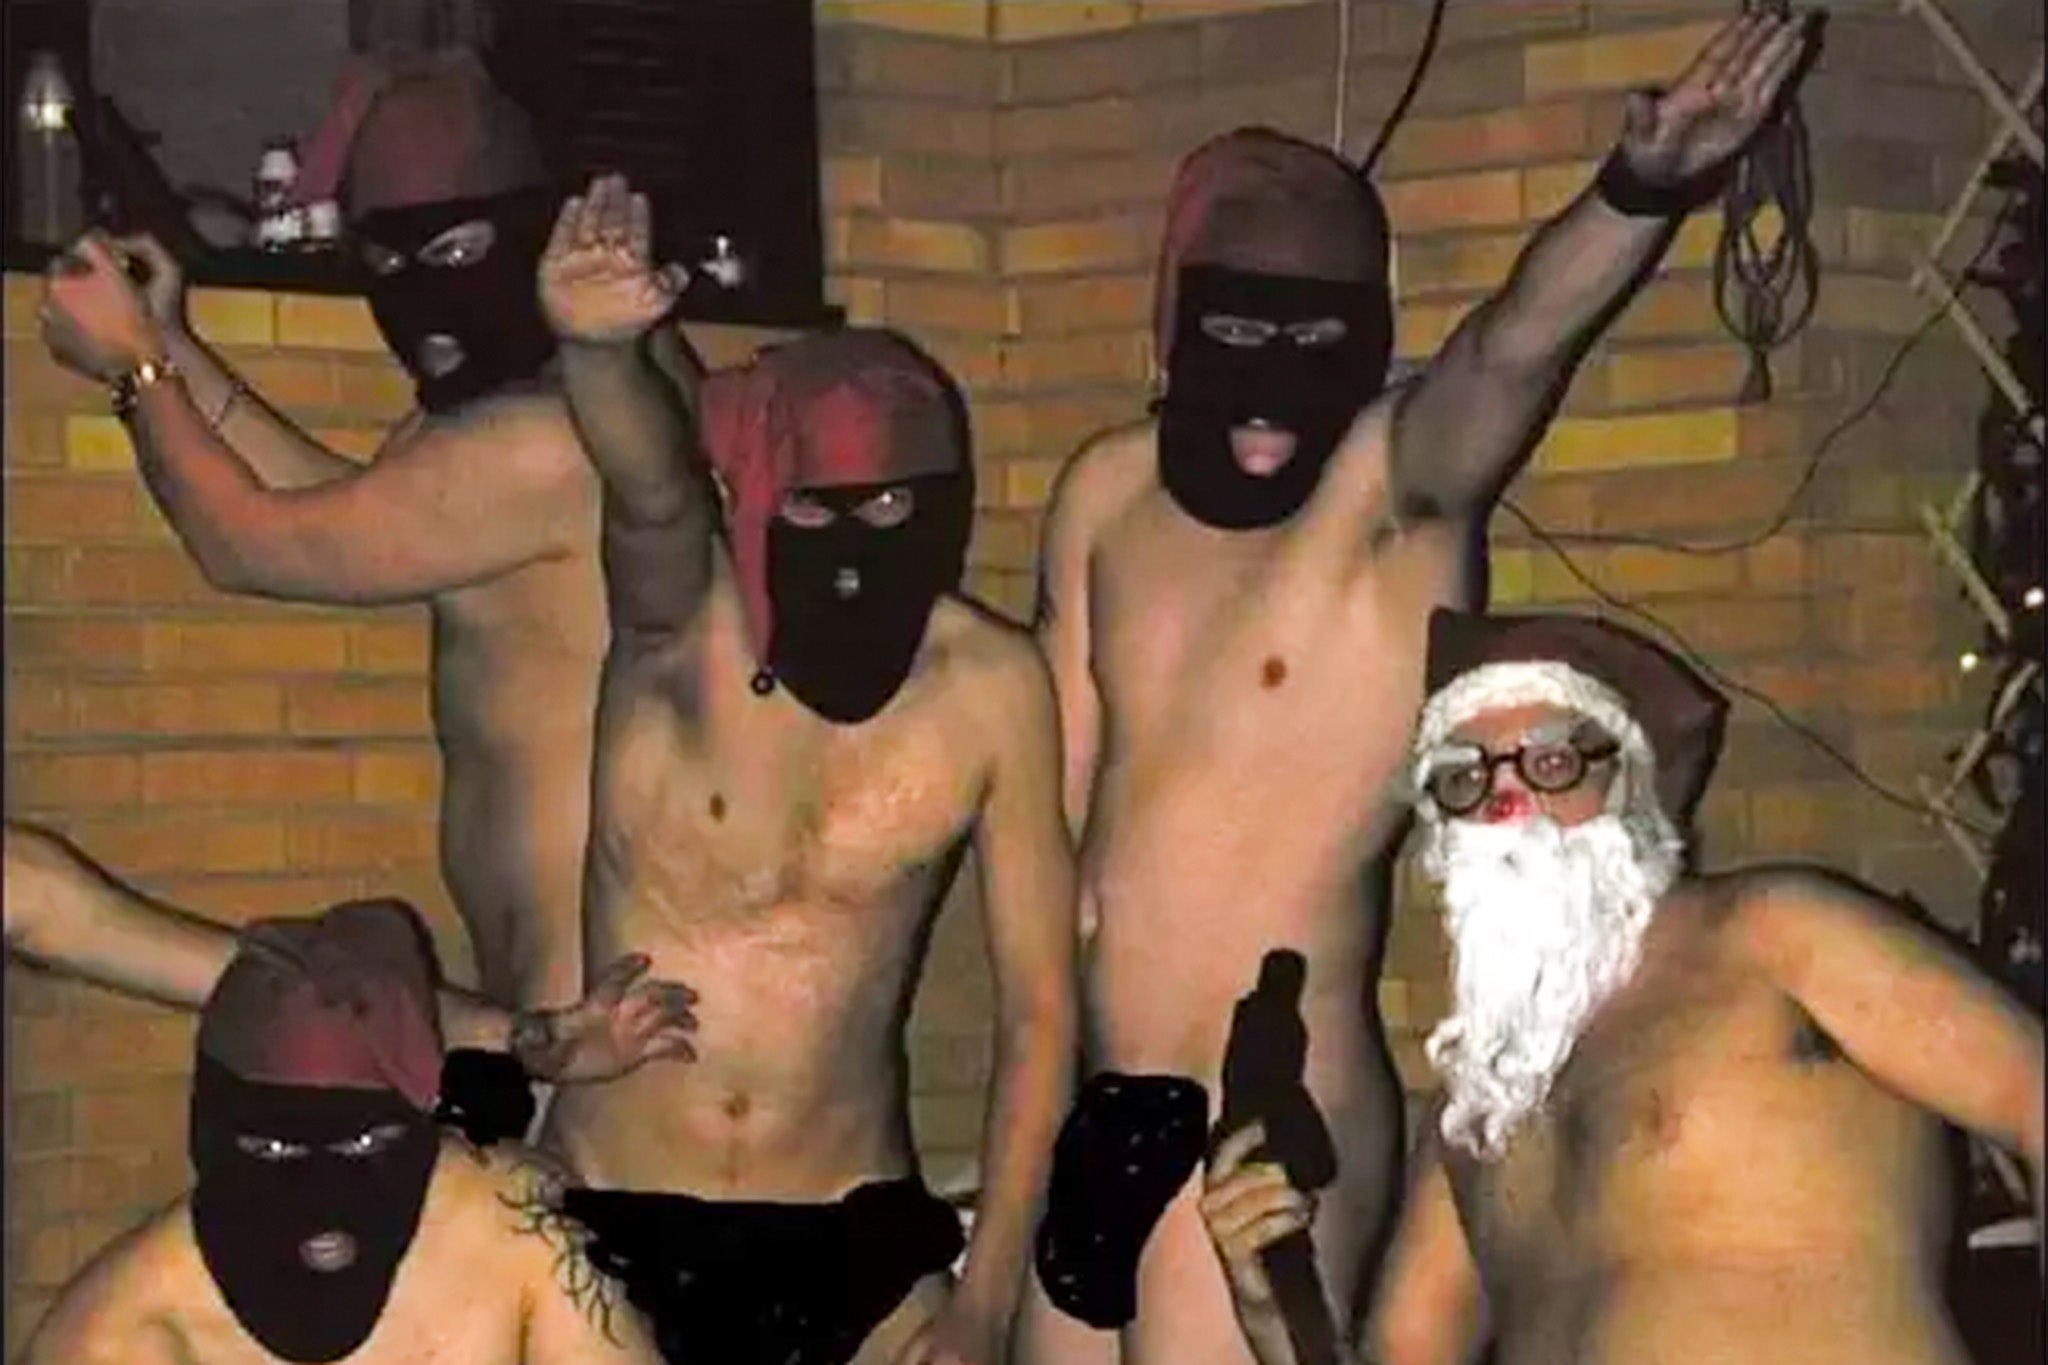 Antti Lindtman, the new leader of the Finnish Social Democratic party (SDP), is pictured with four of his friends at a Christmas party in his secondary school over two decades ago